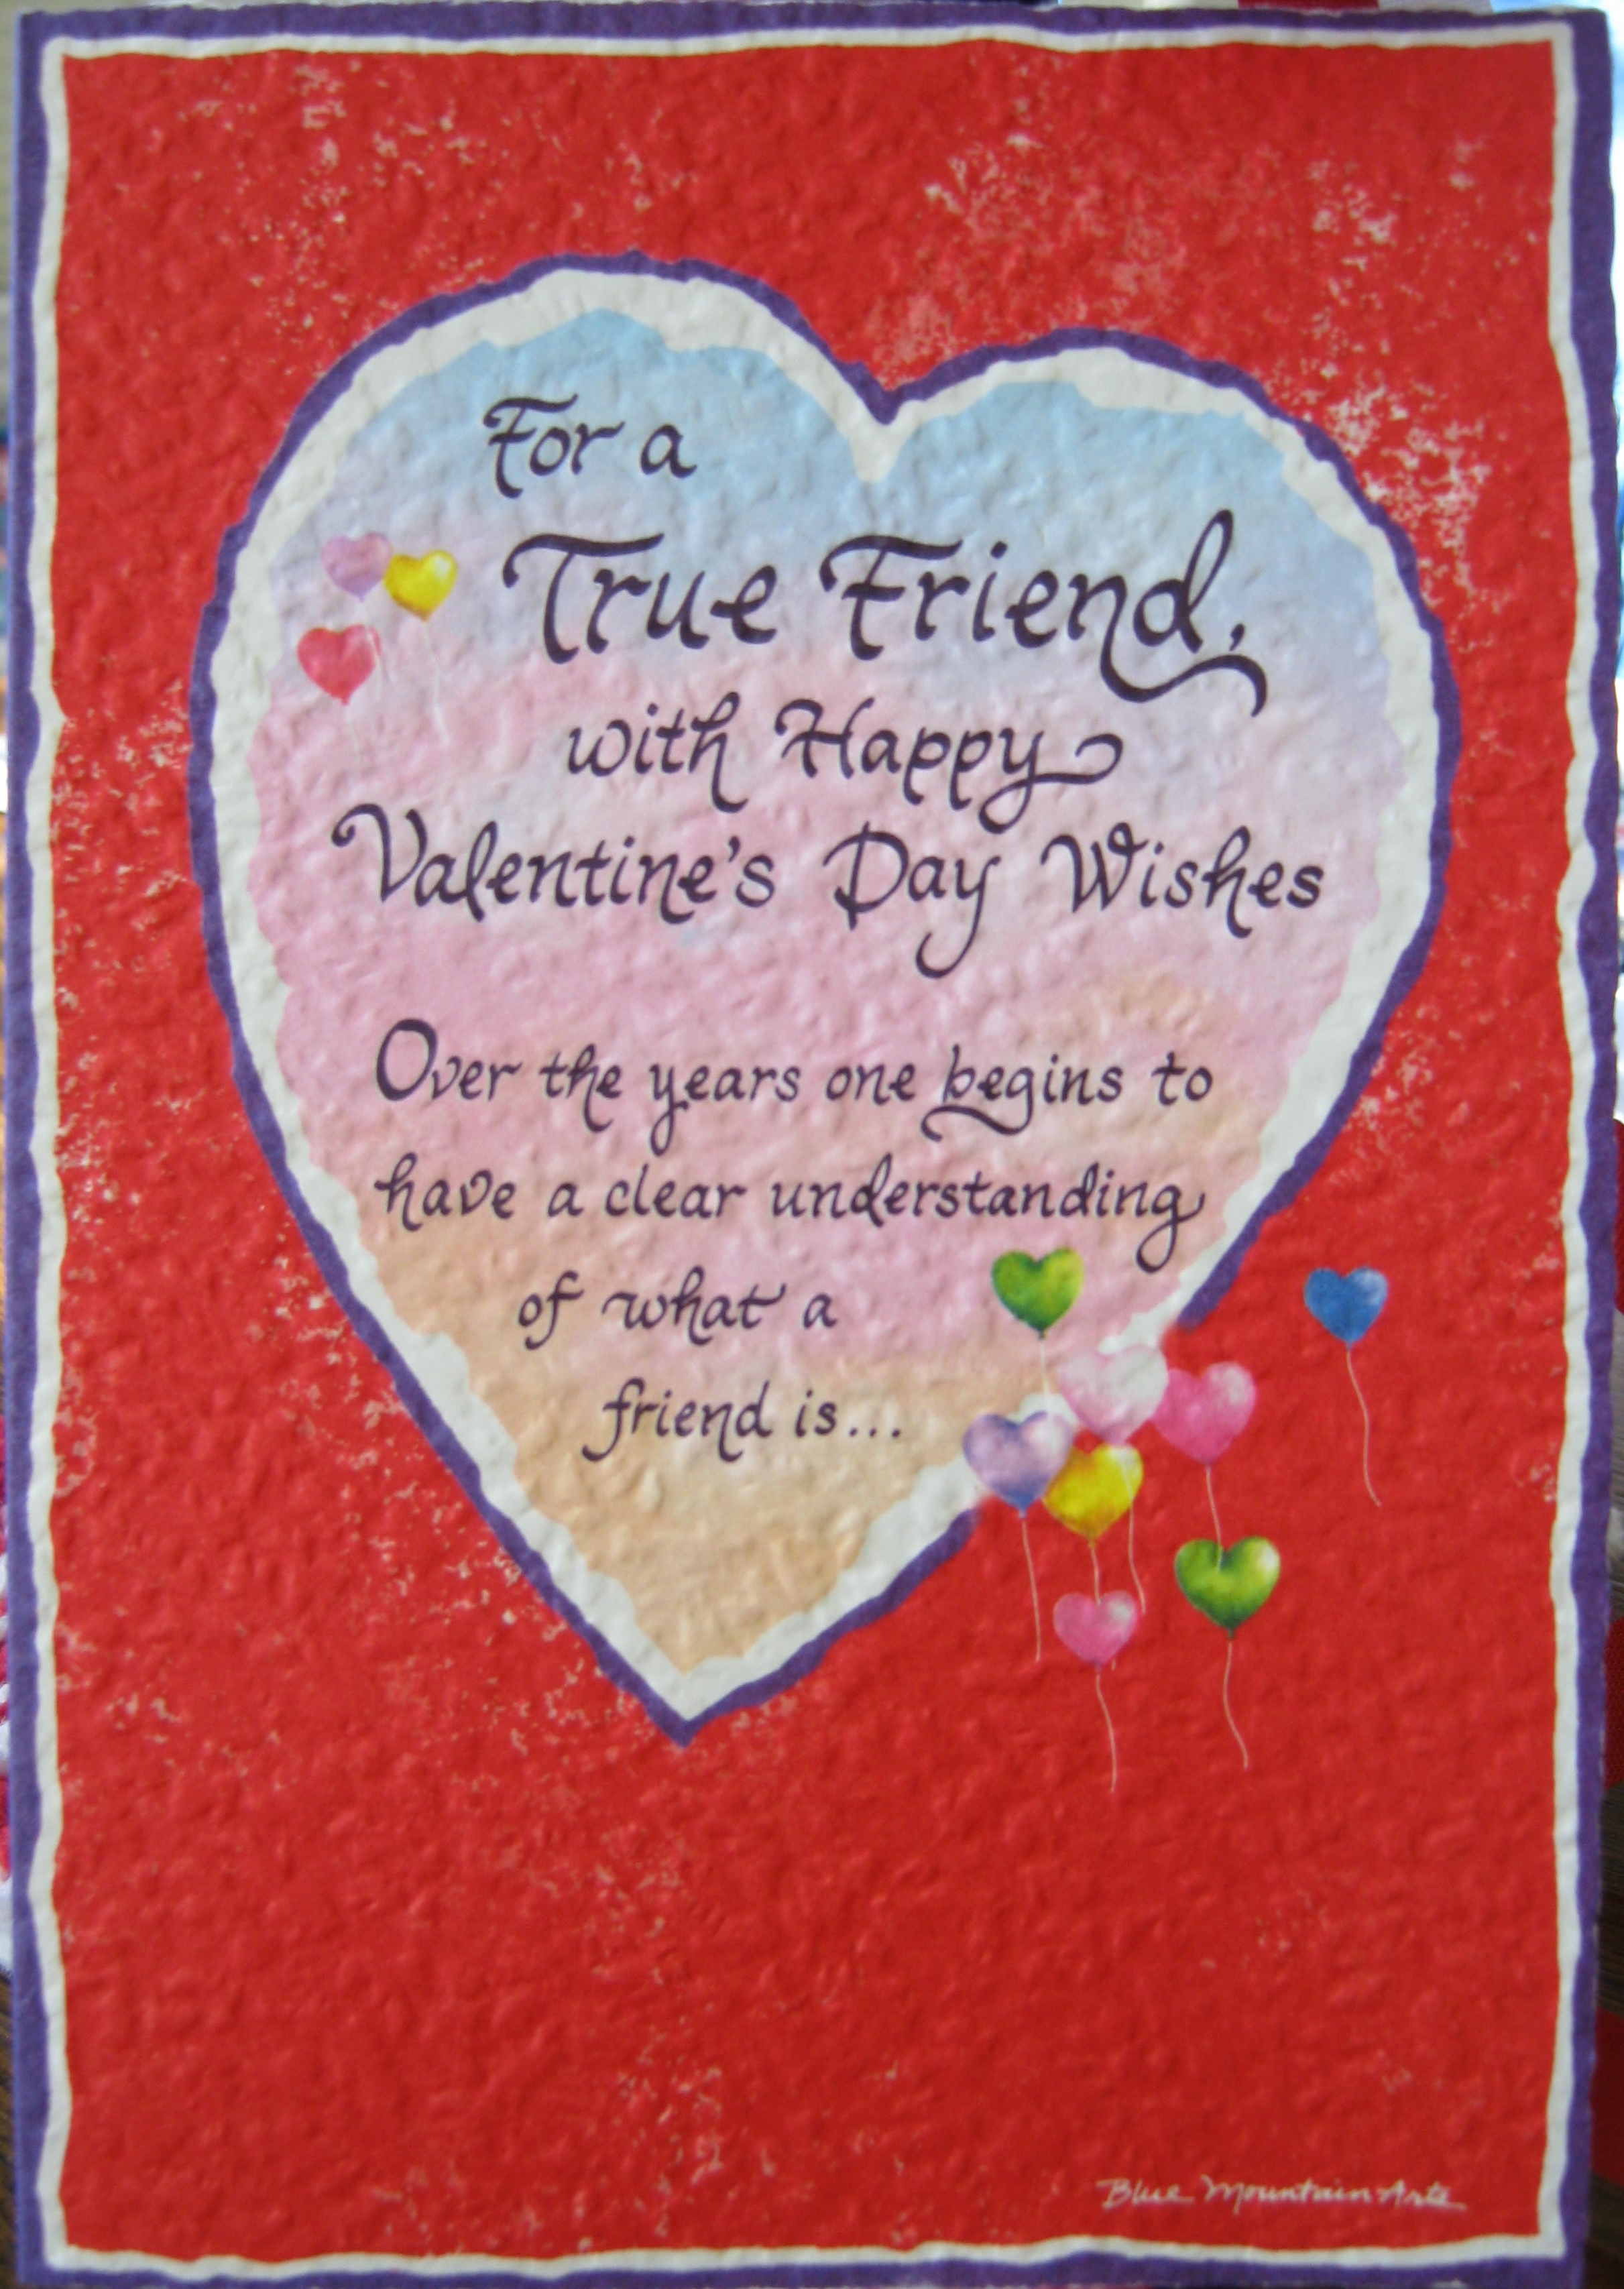 Valentines Day Quotes About Friendship. QuotesGram